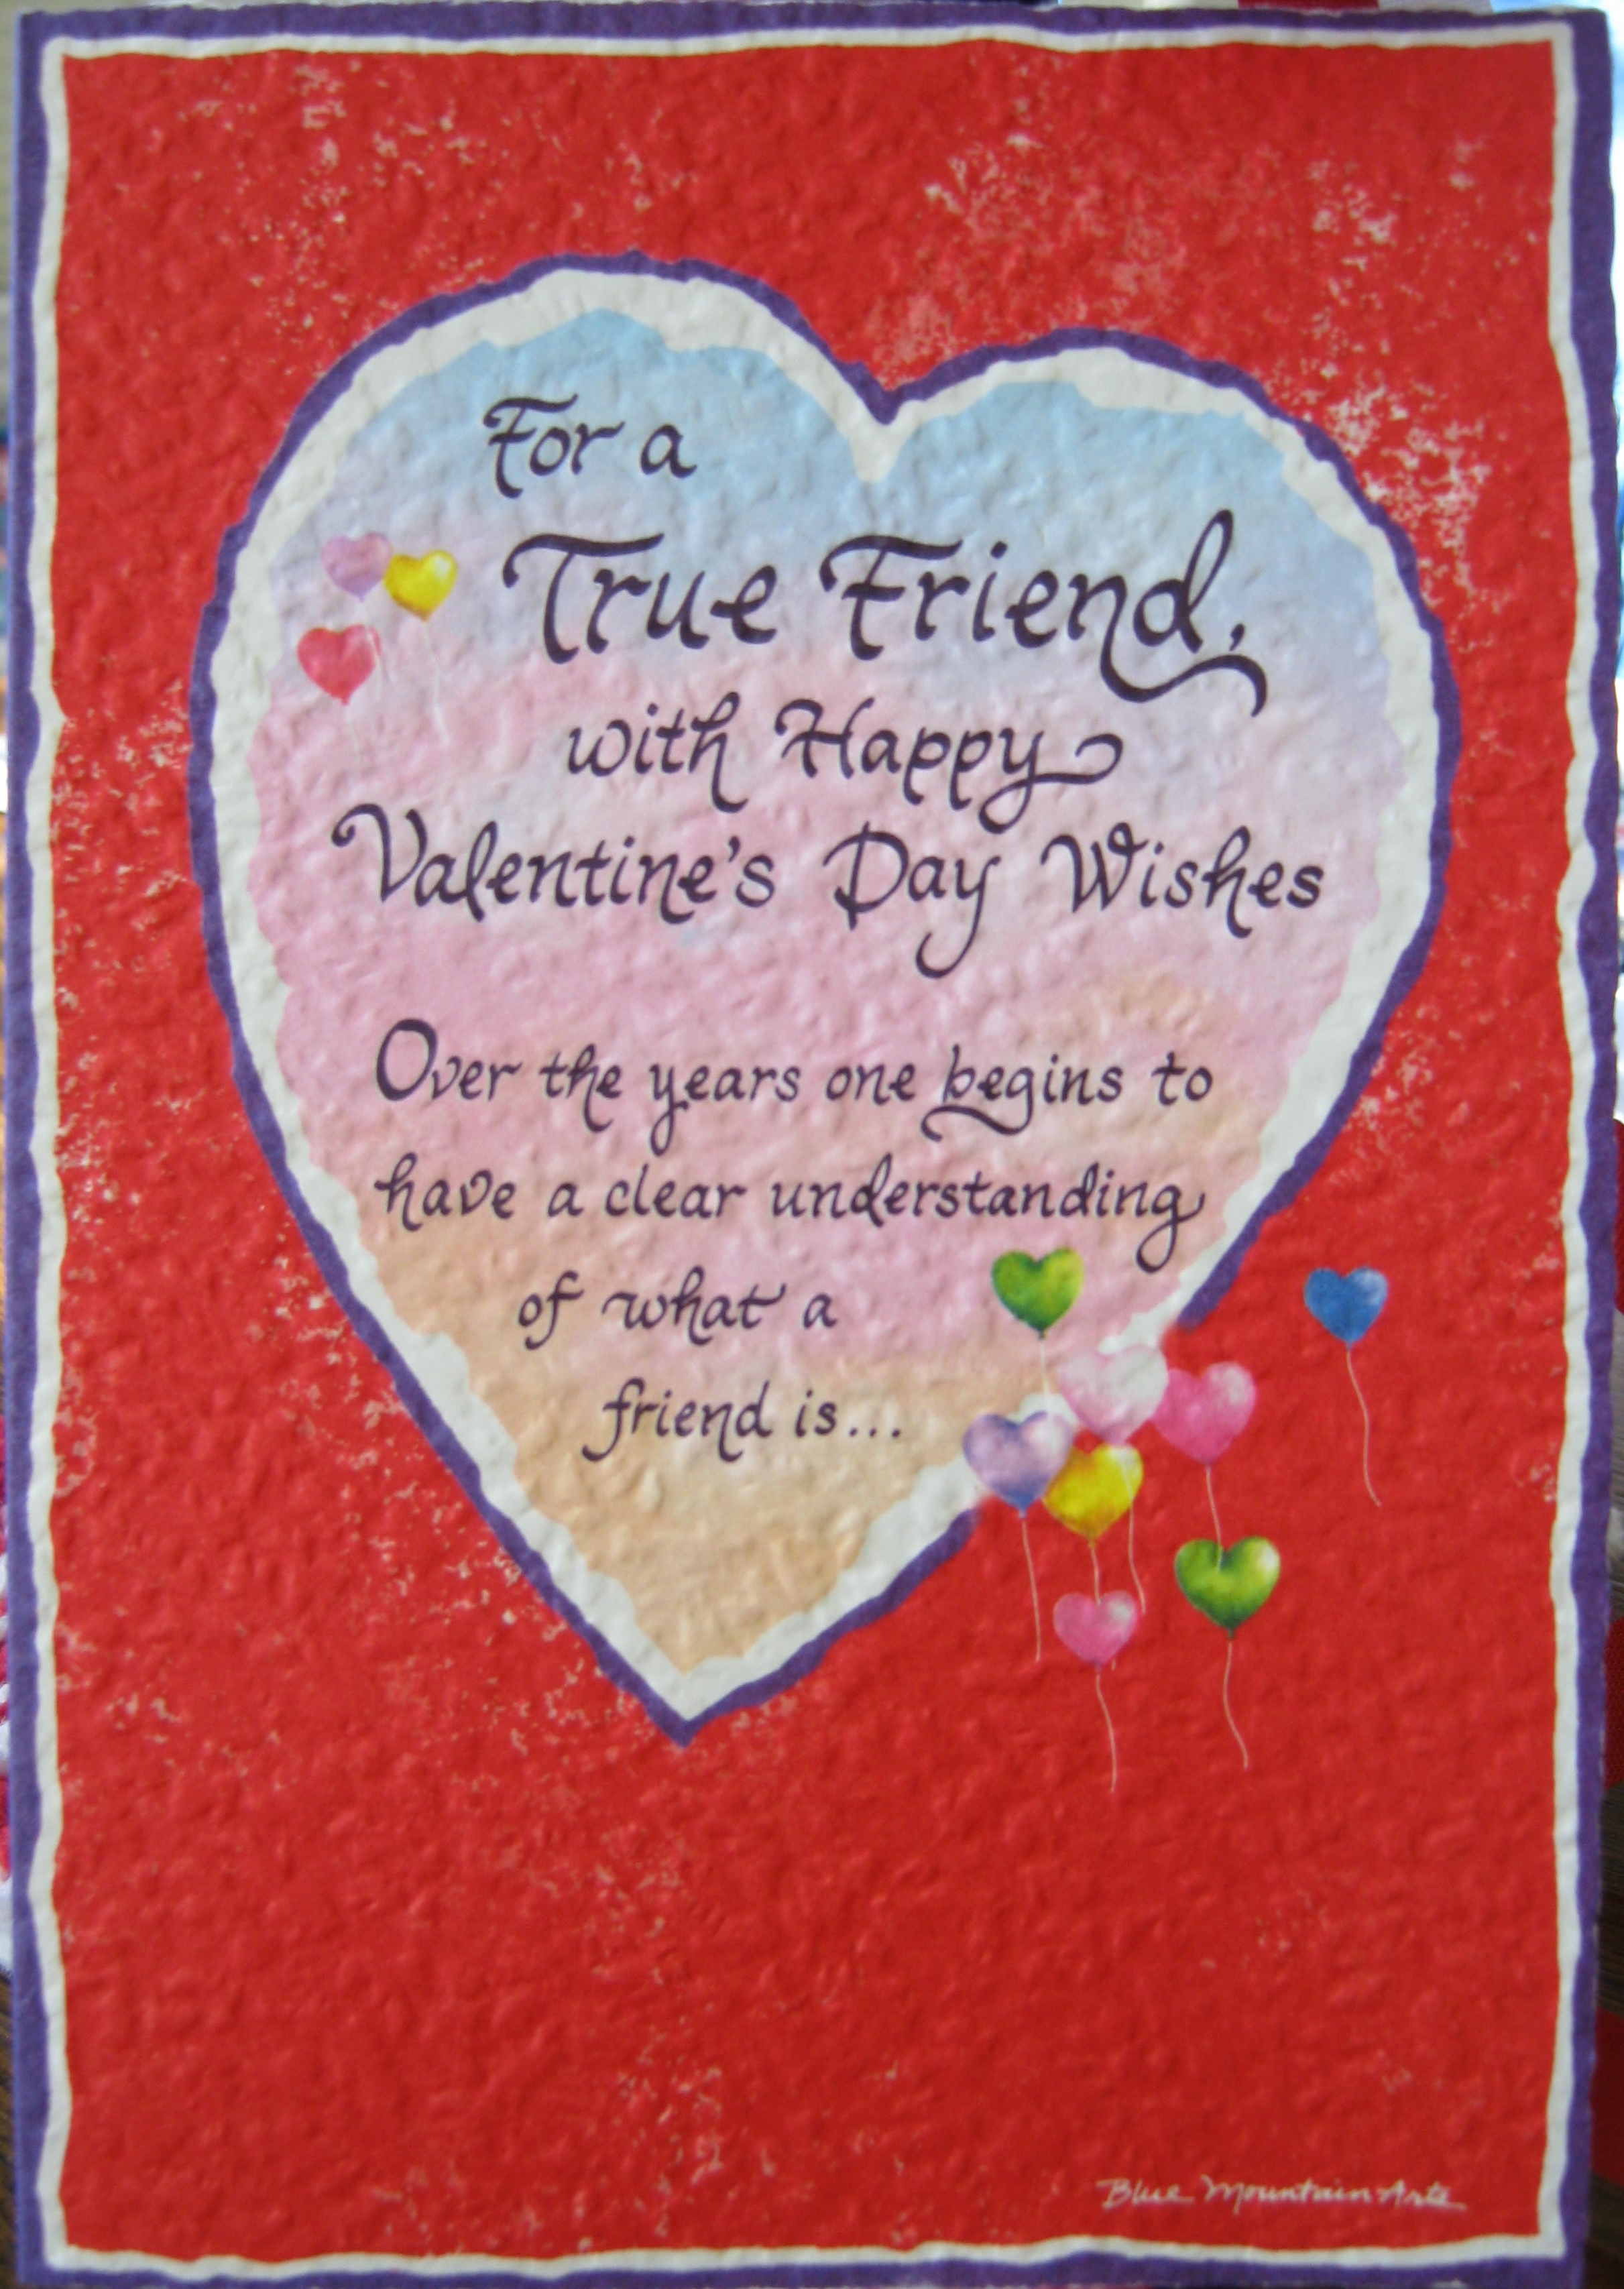 Valentines Day Quotes About Friendship. QuotesGram